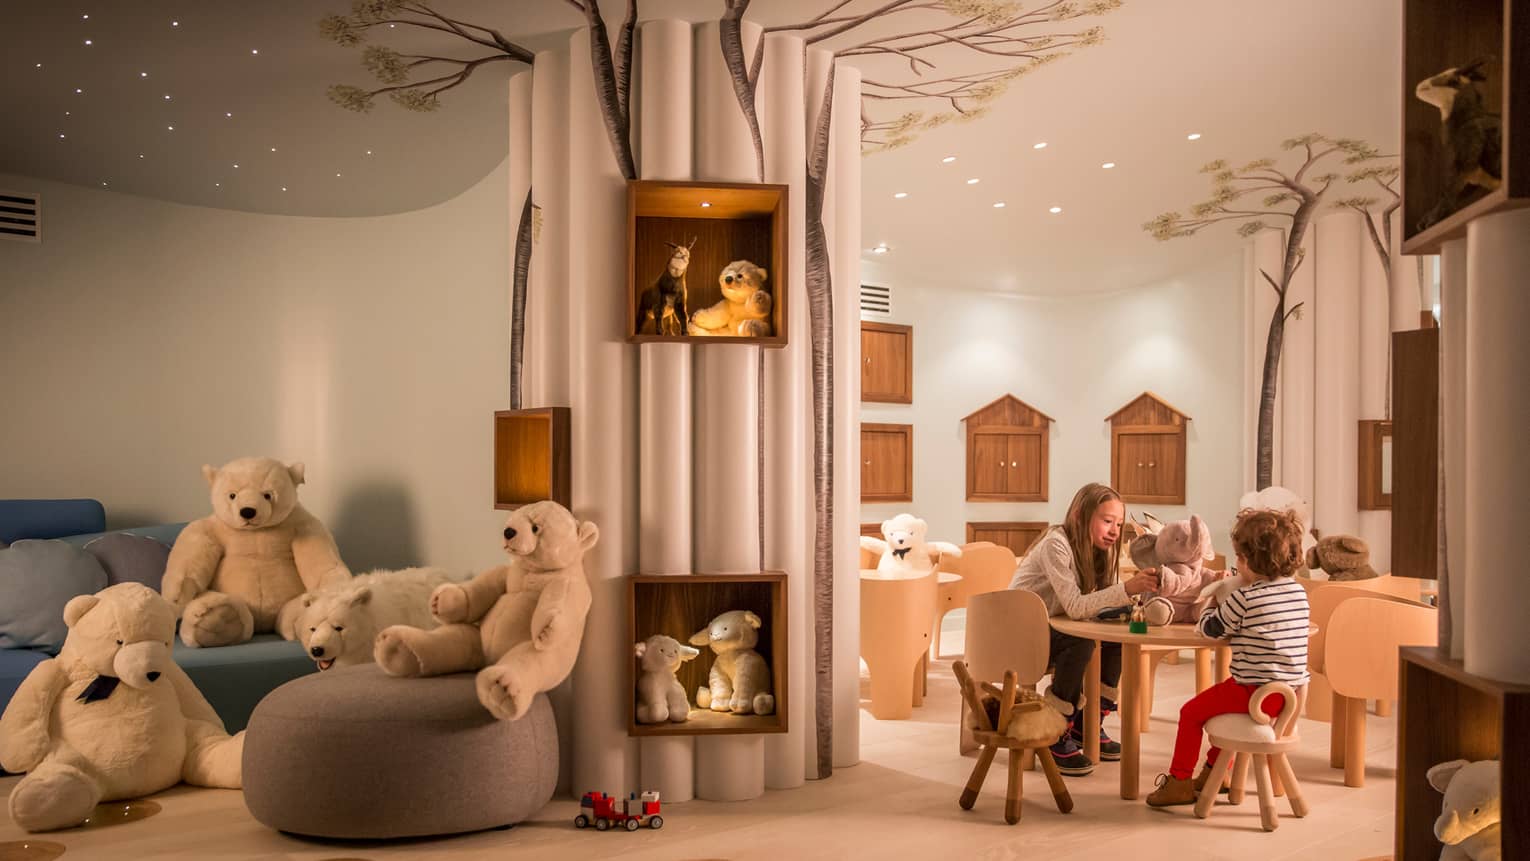 Kids play with toys at small table near chairs, stuffed bears in Kid Kingdom playroom